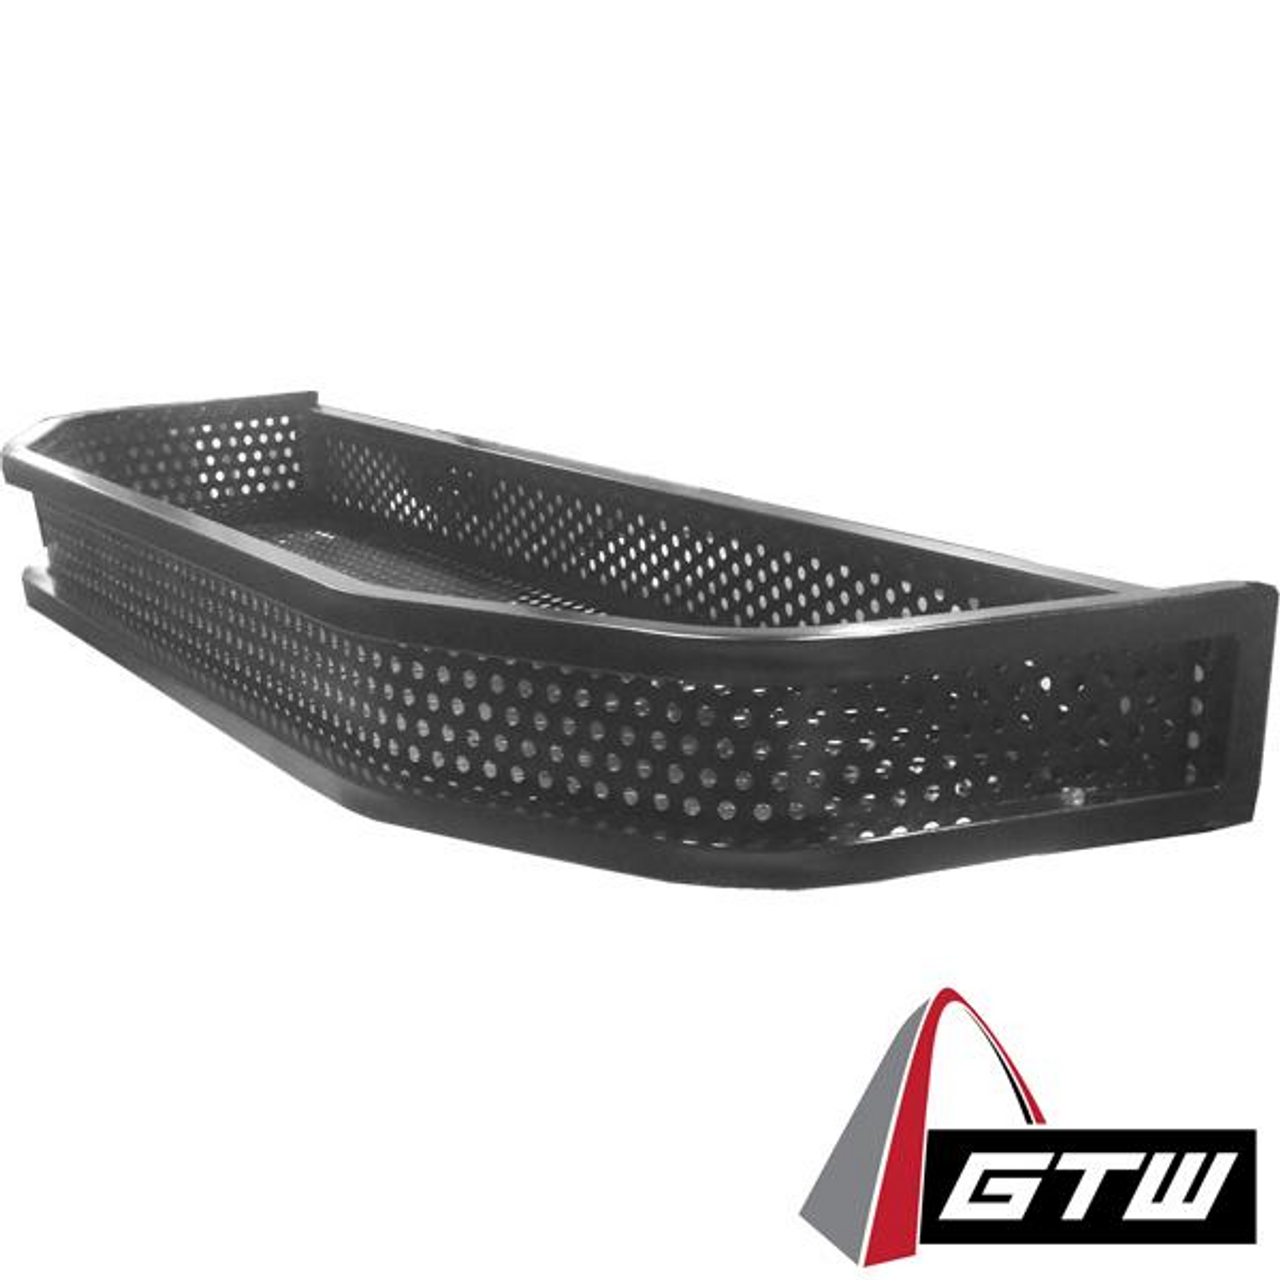 GTW Shooting Clays Basket Only (No Mounting Brackets), 04-020